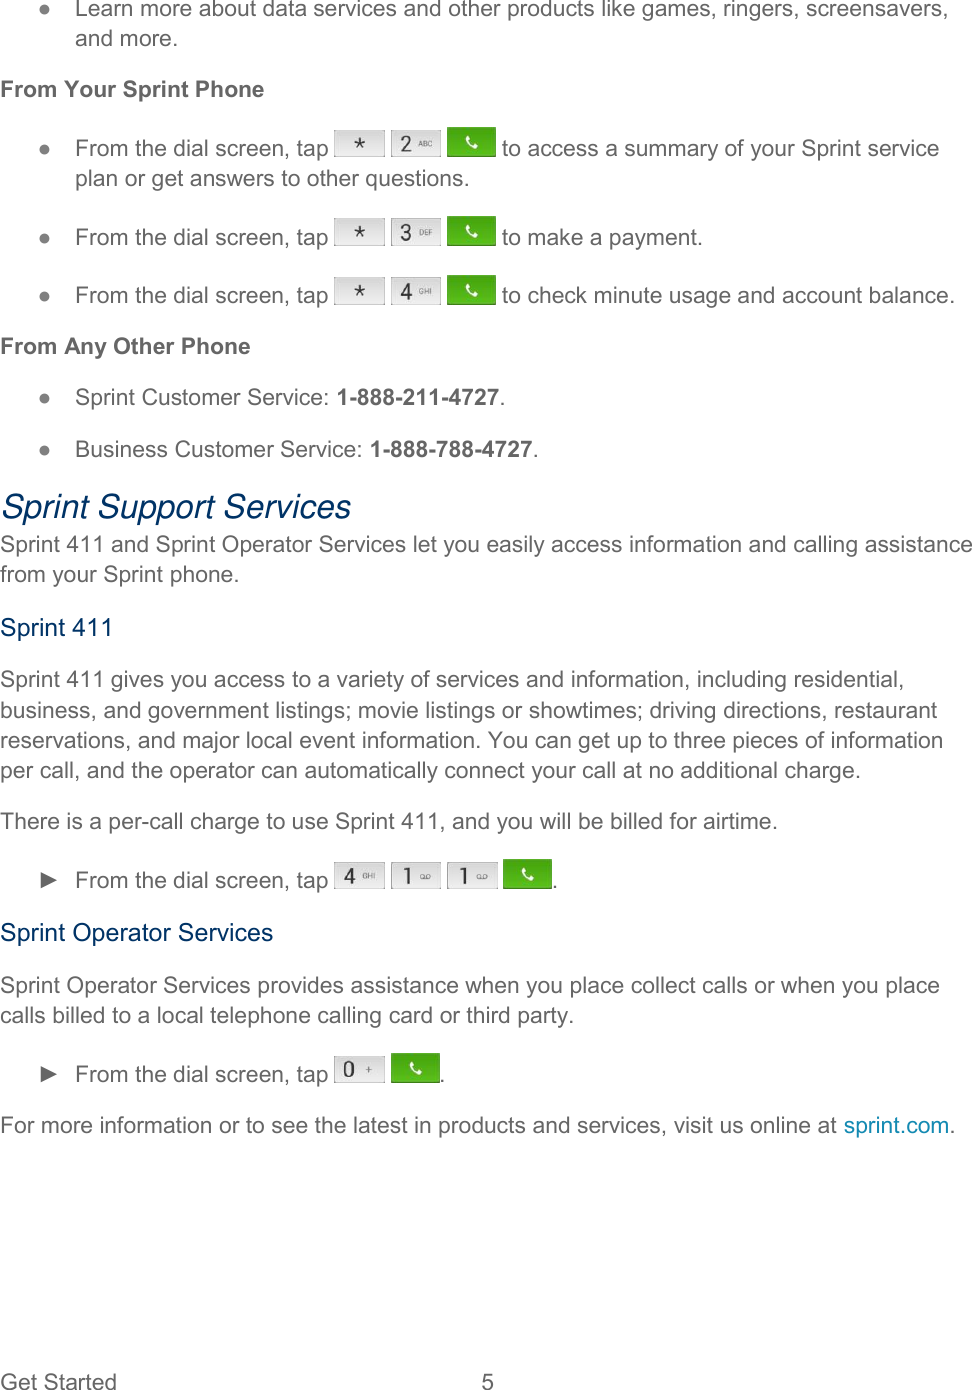  Get Started  5   ●  Learn more about data services and other products like games, ringers, screensavers, and more. From Your Sprint Phone ●  From the dial screen, tap       to access a summary of your Sprint service plan or get answers to other questions. ●  From the dial screen, tap       to make a payment. ●  From the dial screen, tap       to check minute usage and account balance. From Any Other Phone ●  Sprint Customer Service: 1-888-211-4727. ●  Business Customer Service: 1-888-788-4727. Sprint Support Services Sprint 411 and Sprint Operator Services let you easily access information and calling assistance from your Sprint phone. Sprint 411 Sprint 411 gives you access to a variety of services and information, including residential, business, and government listings; movie listings or showtimes; driving directions, restaurant reservations, and major local event information. You can get up to three pieces of information per call, and the operator can automatically connect your call at no additional charge. There is a per-call charge to use Sprint 411, and you will be billed for airtime. ►  From the dial screen, tap        . Sprint Operator Services Sprint Operator Services provides assistance when you place collect calls or when you place calls billed to a local telephone calling card or third party. ►  From the dial screen, tap    . For more information or to see the latest in products and services, visit us online at sprint.com. 